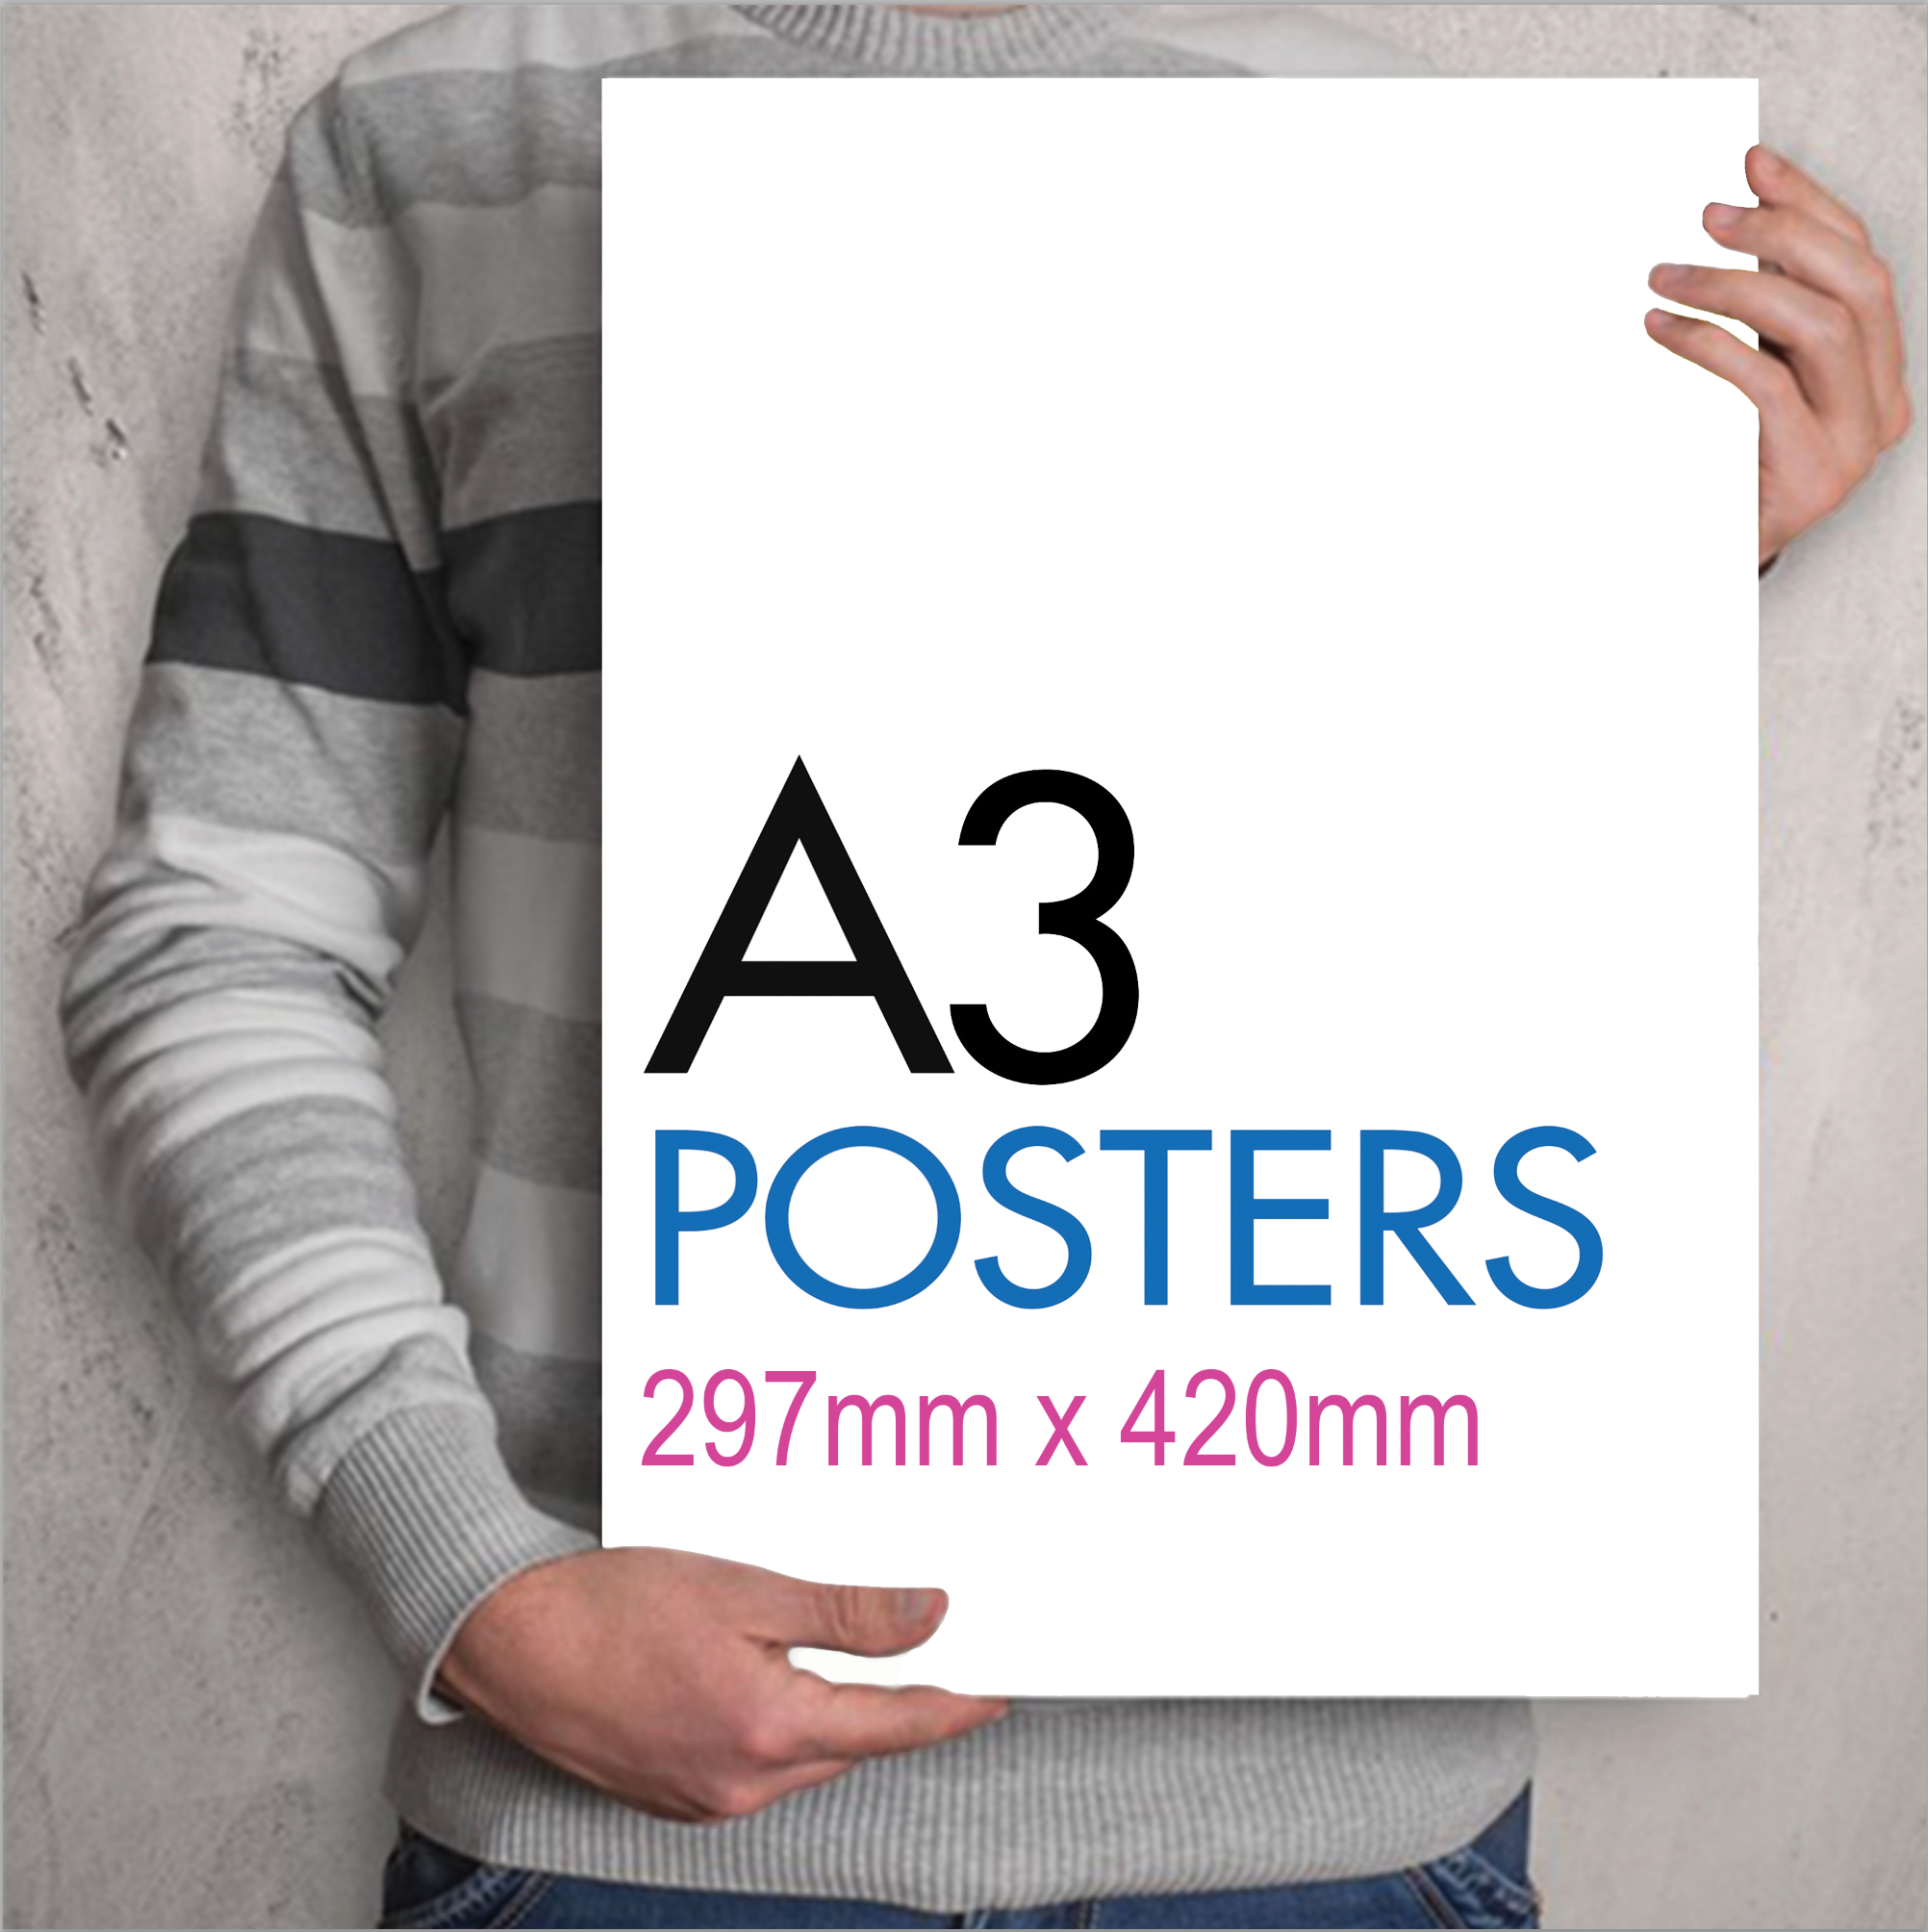 size of a3 poster